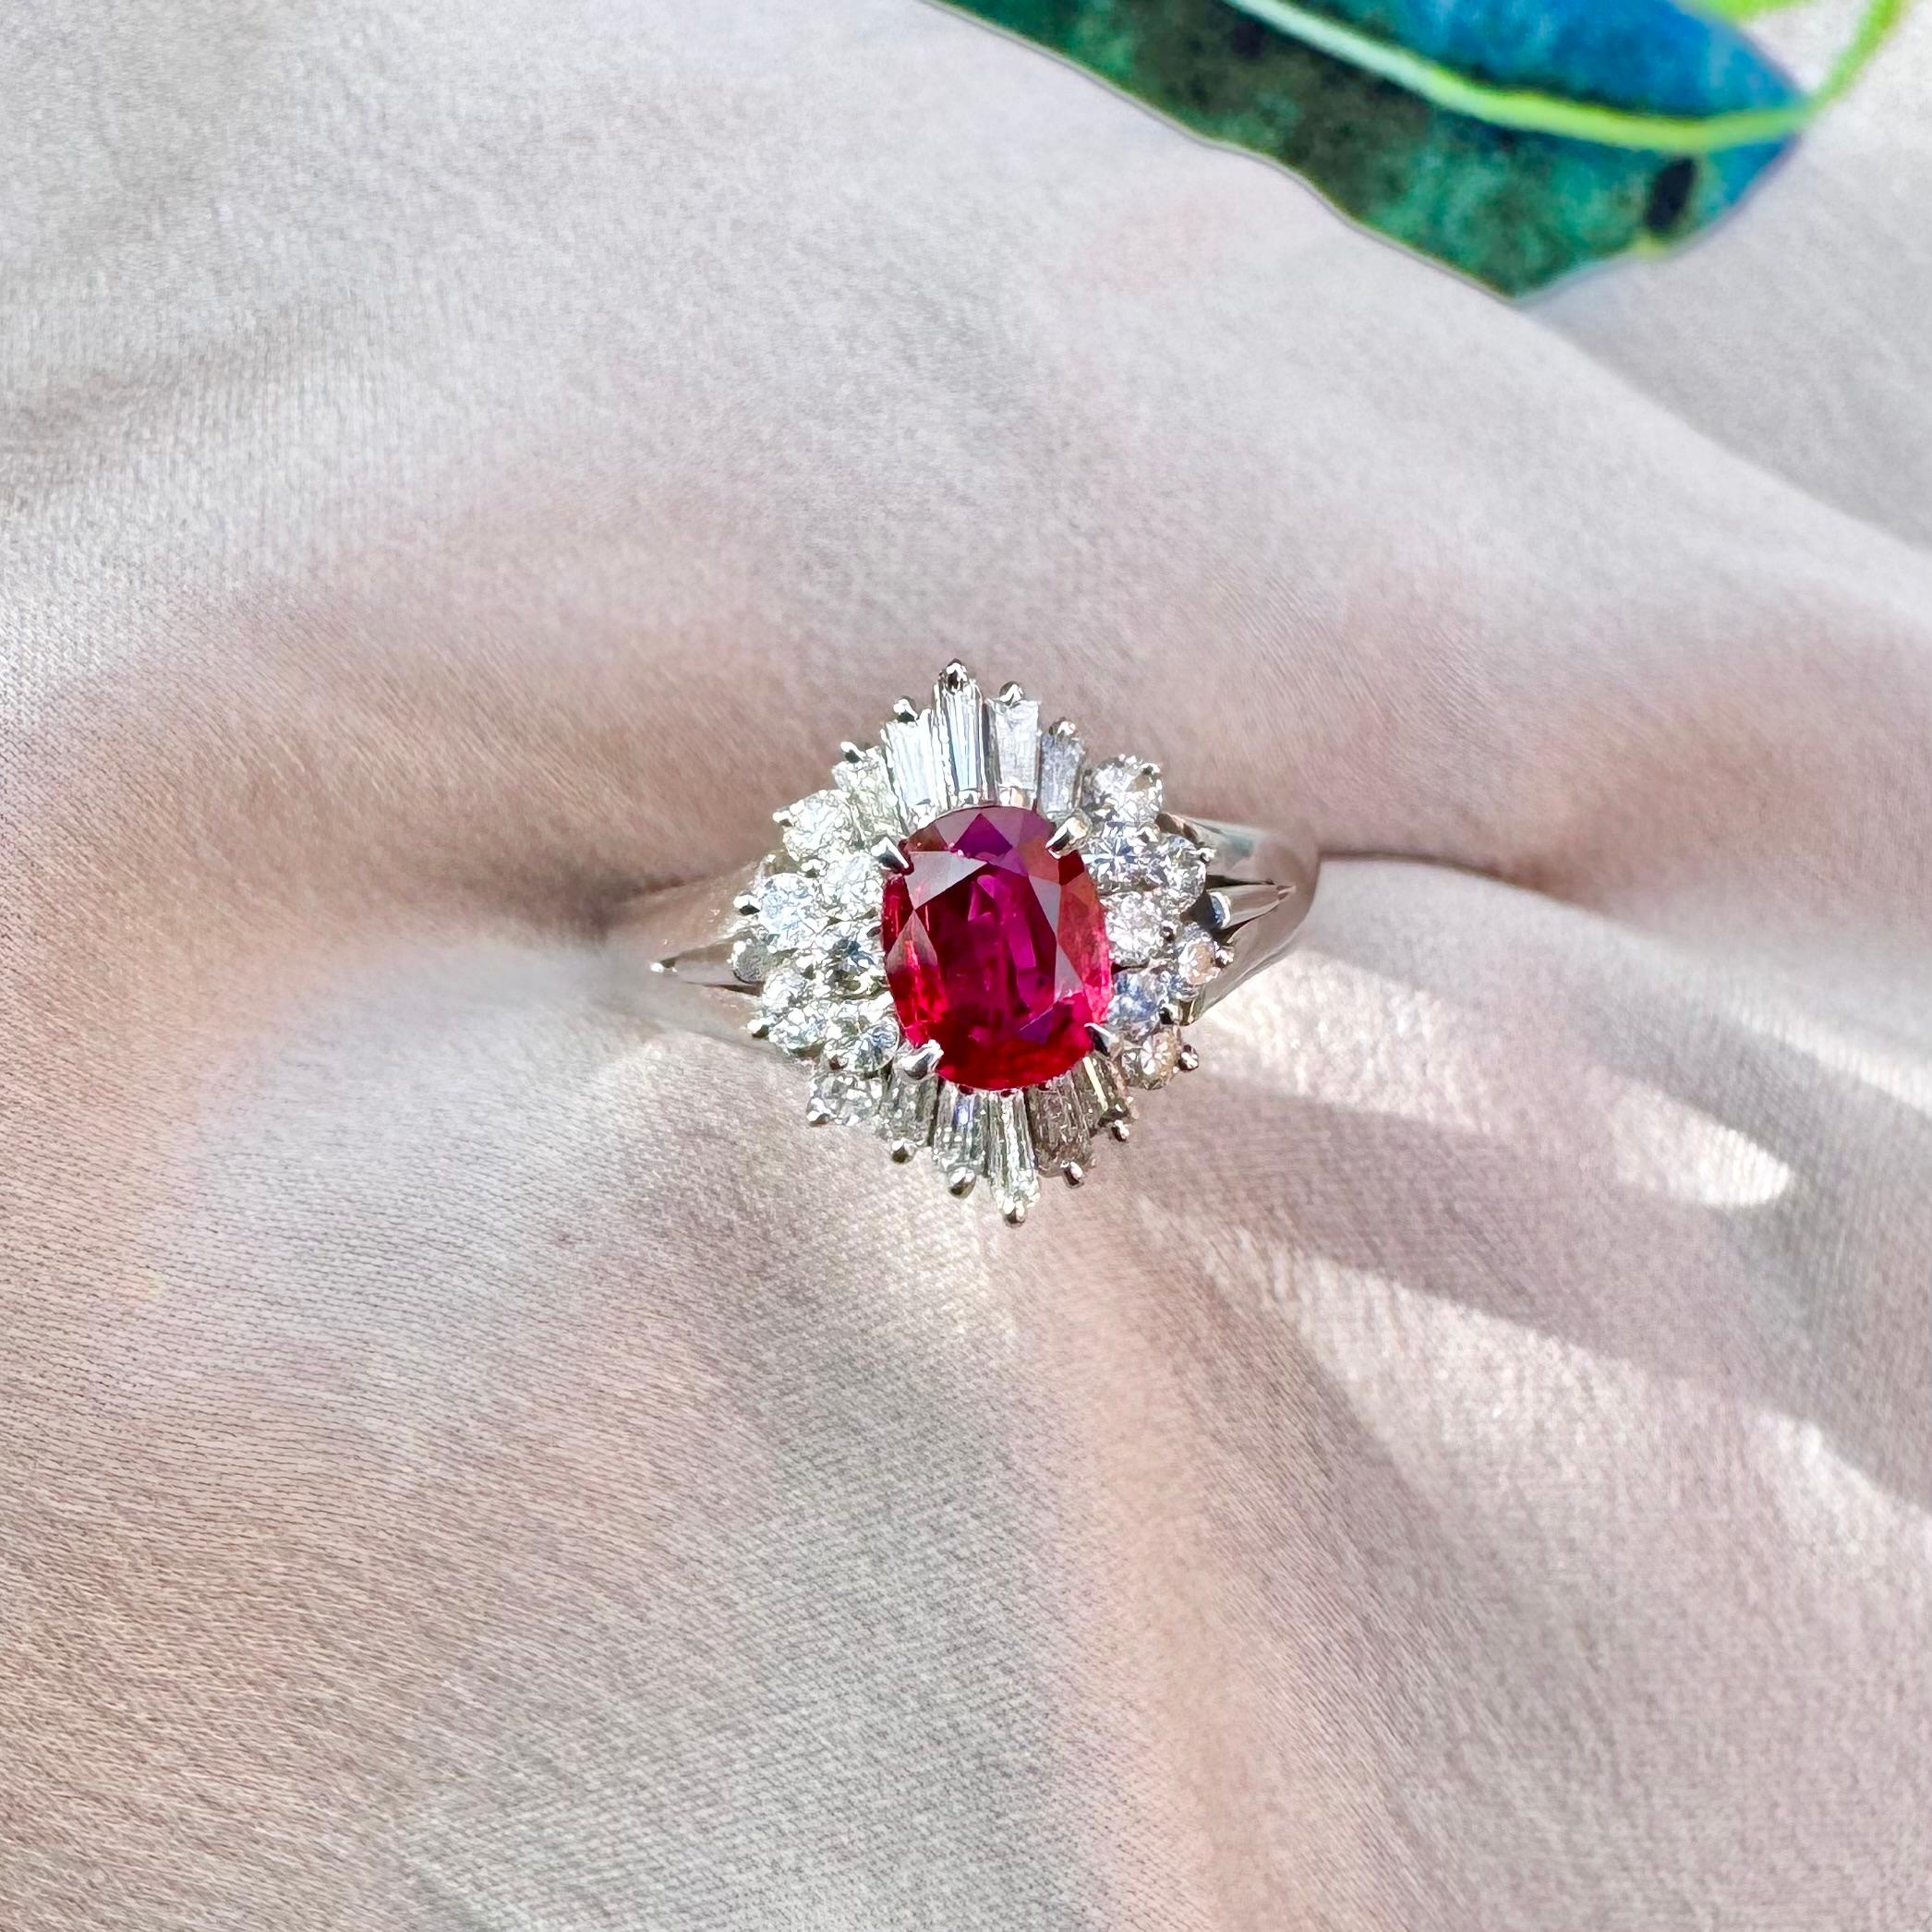 A stunning and sparkling, vintage Ruby and diamond halo ring, set in a classic and timeless platinum setting. 

Specifications: 
Weight of Ruby: 0.64 carats
Diamond Weights: 0.49 carats 
Metal Type: Platinum 
Pre-Owned Jewelry Condition: